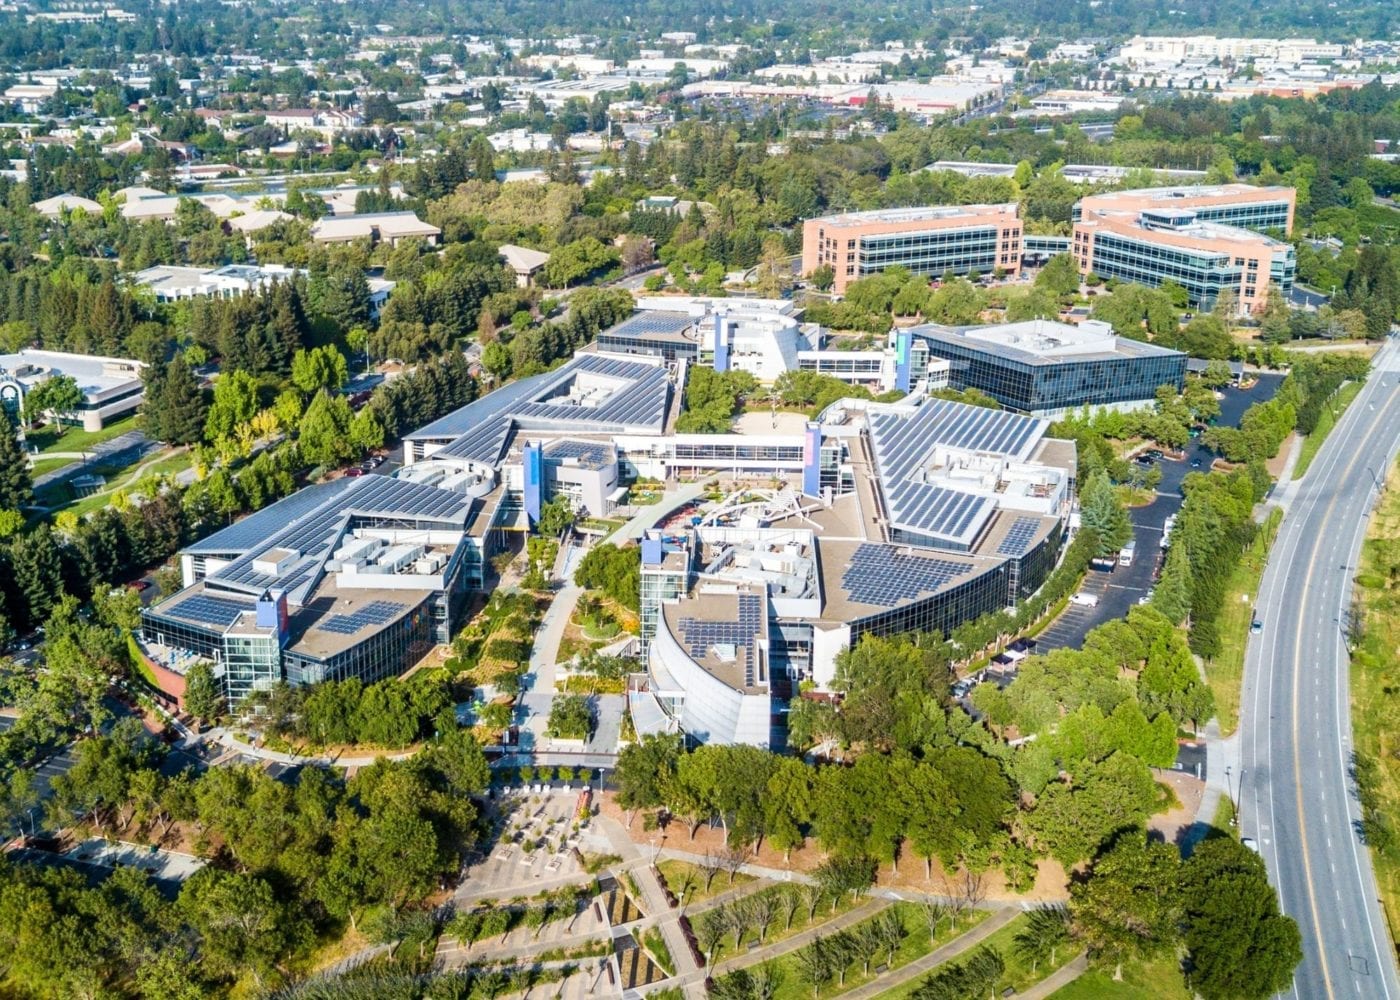 Google campus from above